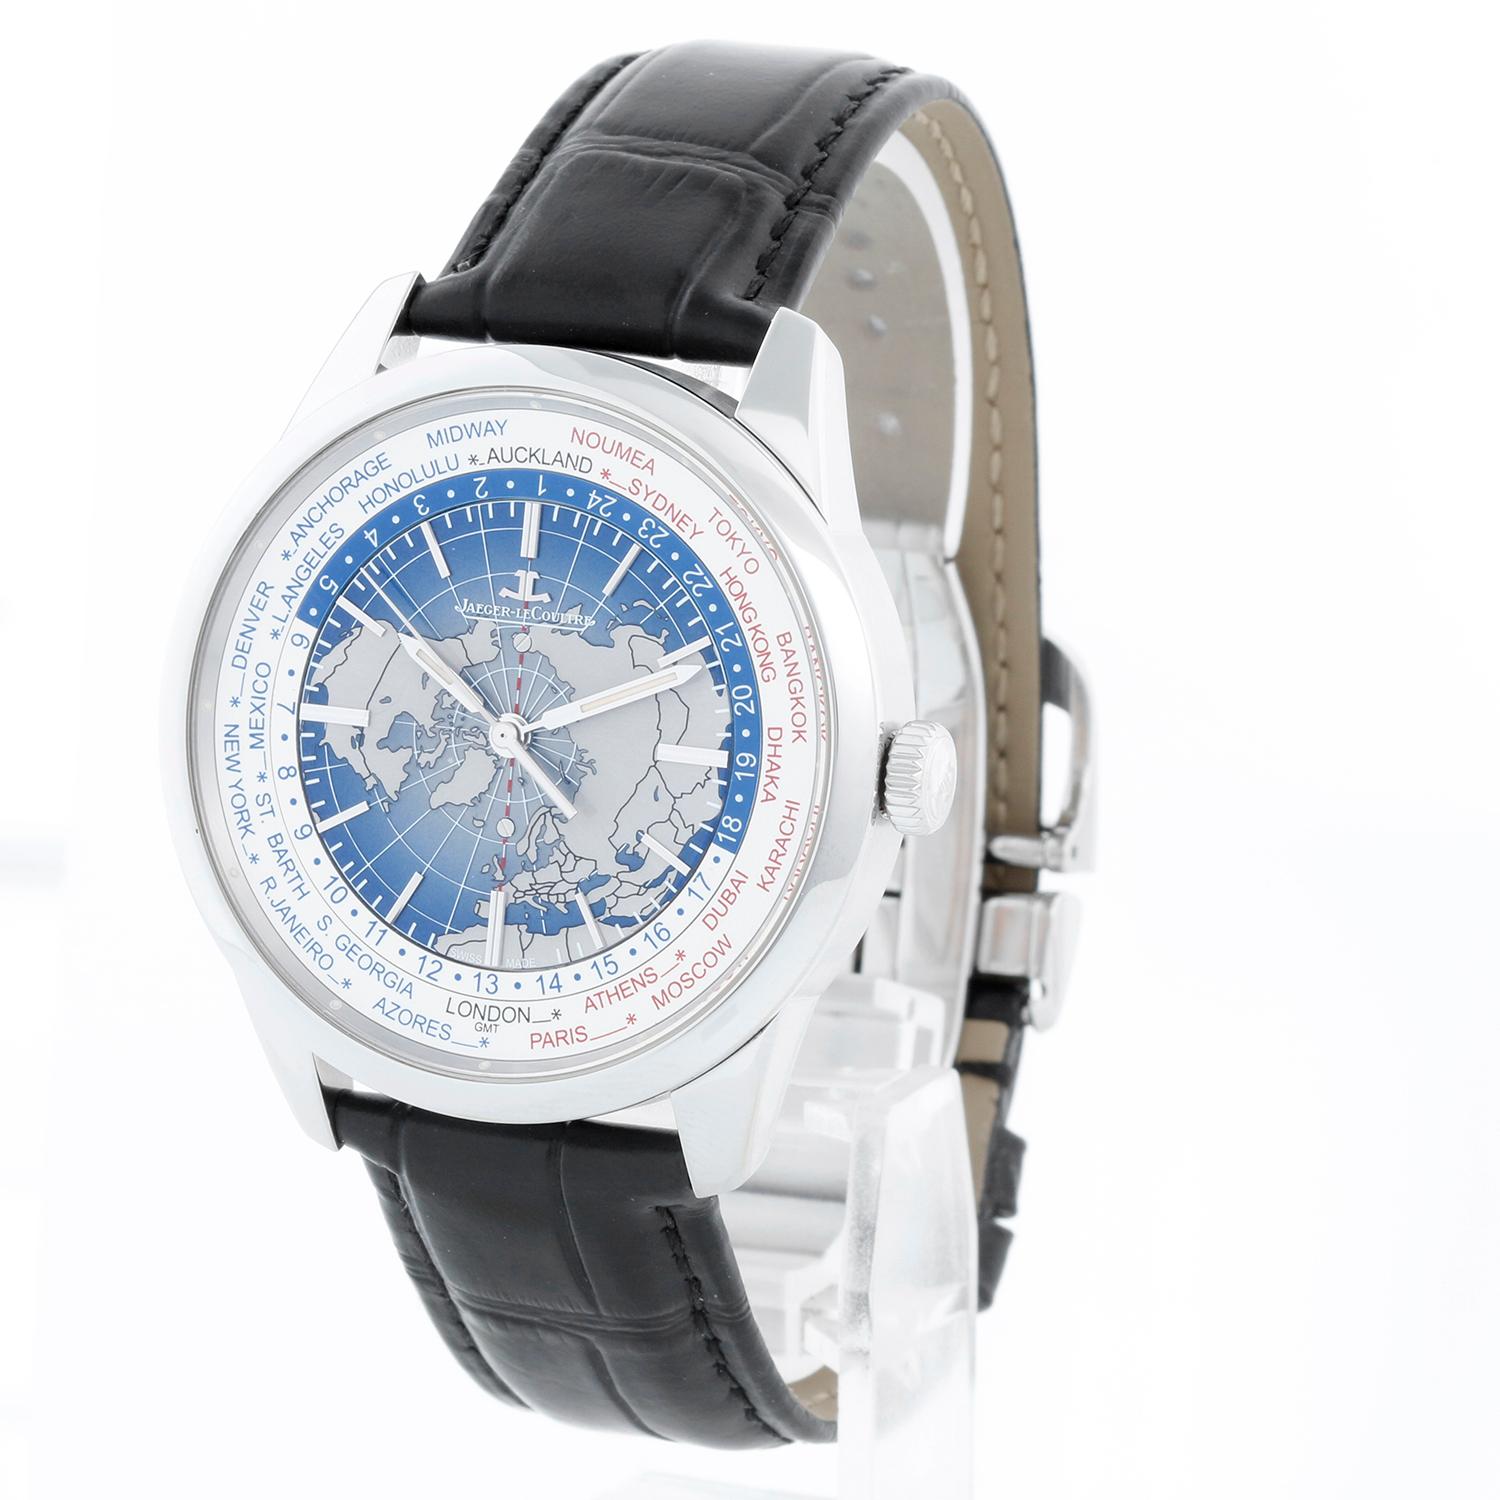 Jaeger LeCoultre Geophysic Universal Time Stainless Steel Men's Watch Ref Q81084 For Sale 1